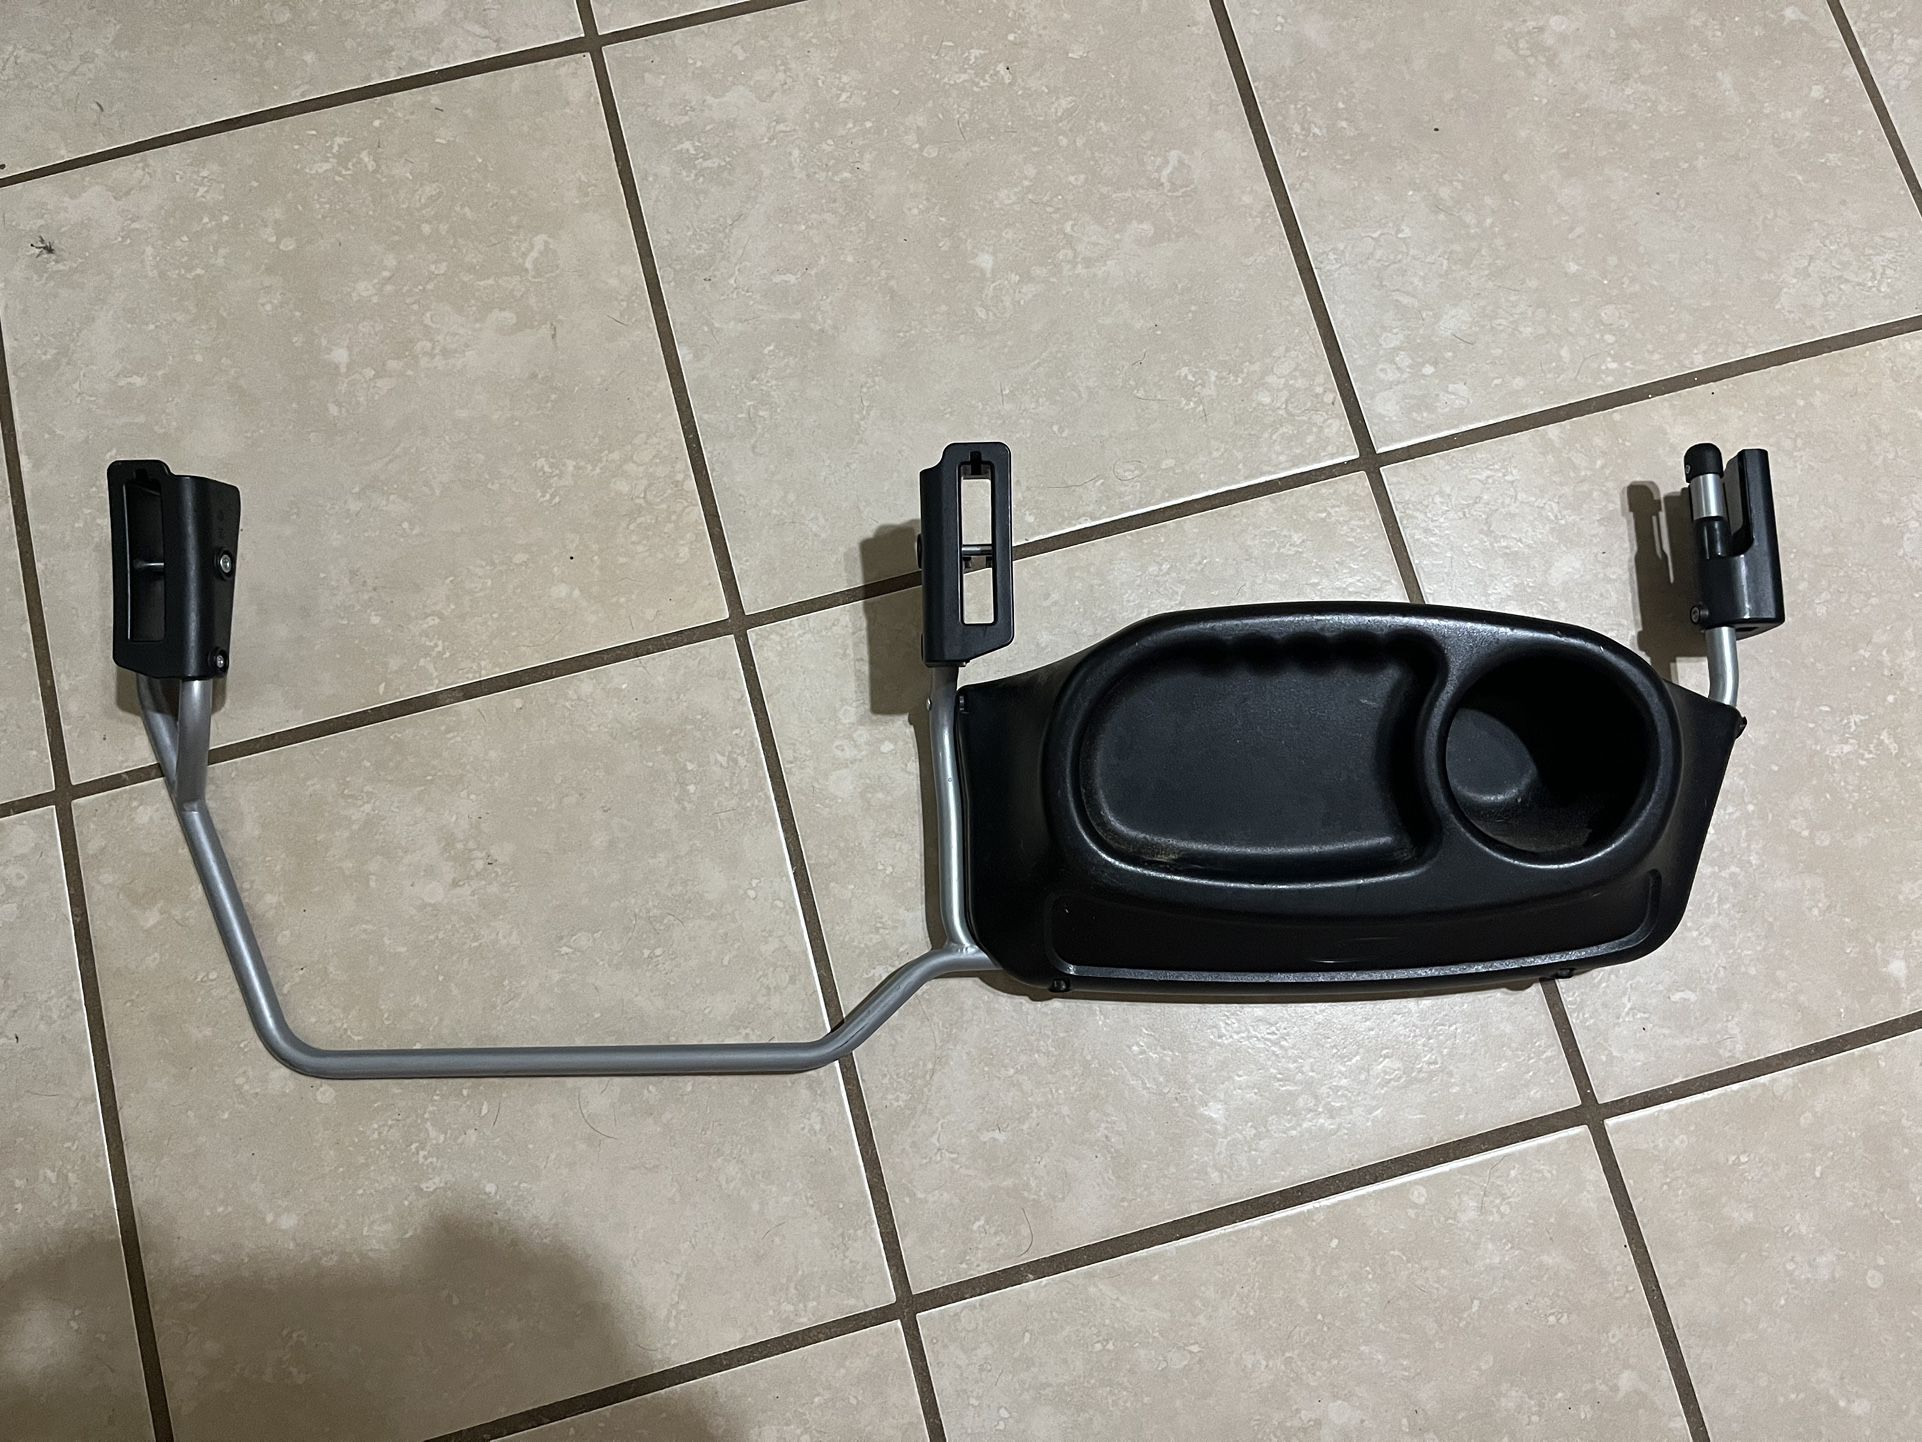 BOB Double stroller Britax Adapter And Snack Tray